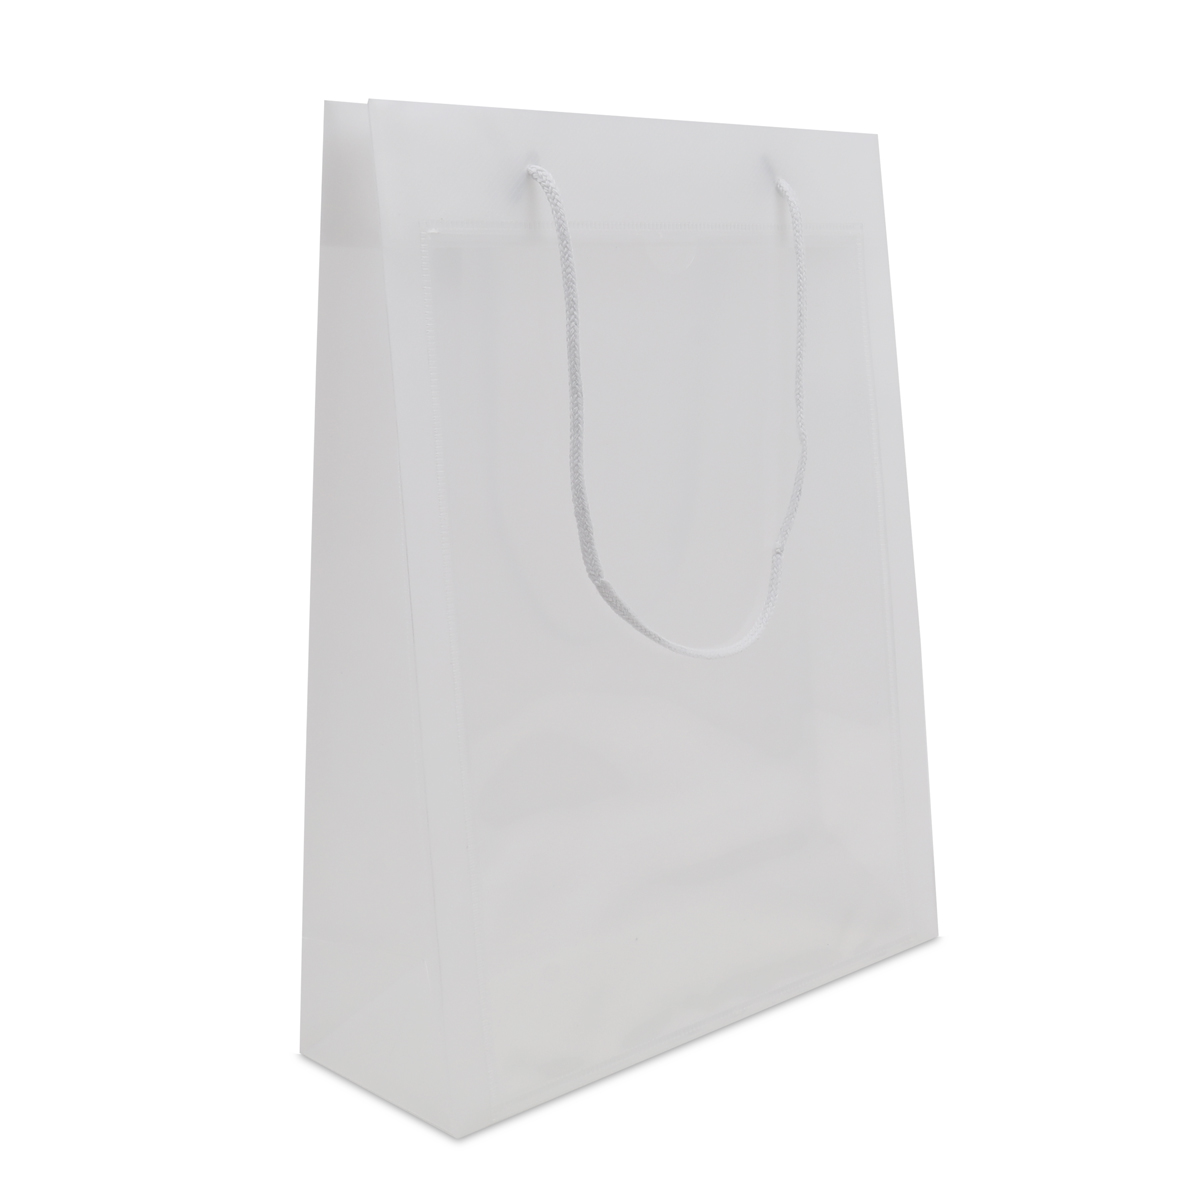 Luxury plastic window bags with A4/A5 insert window